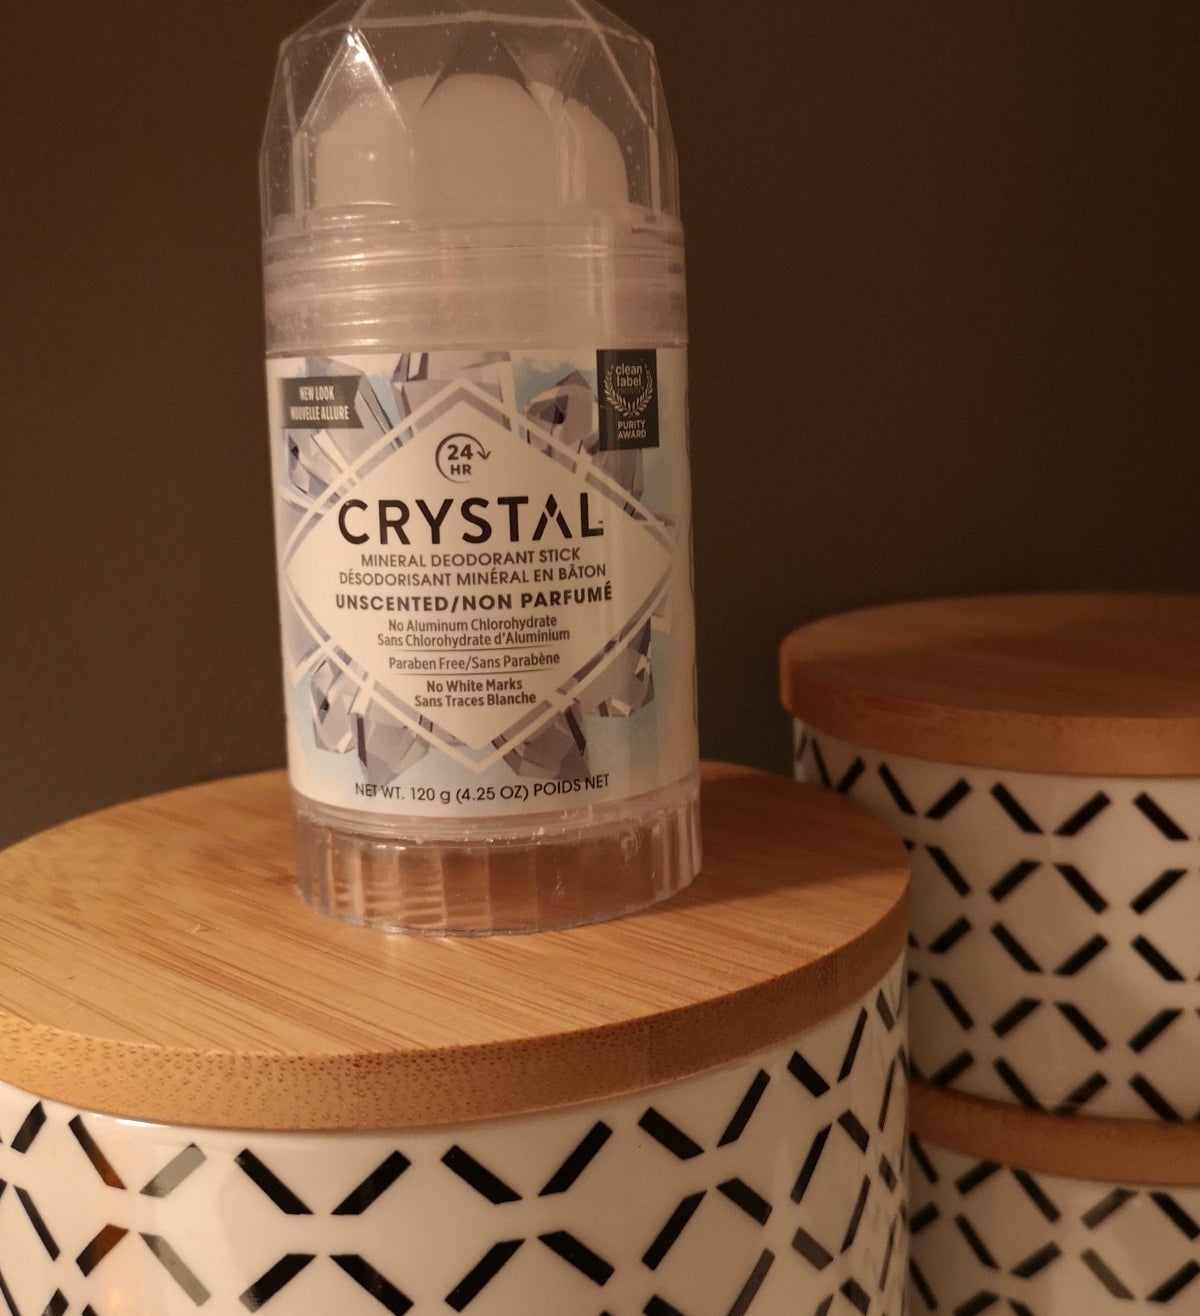 A crystal mineral deodorant stick in unscented 